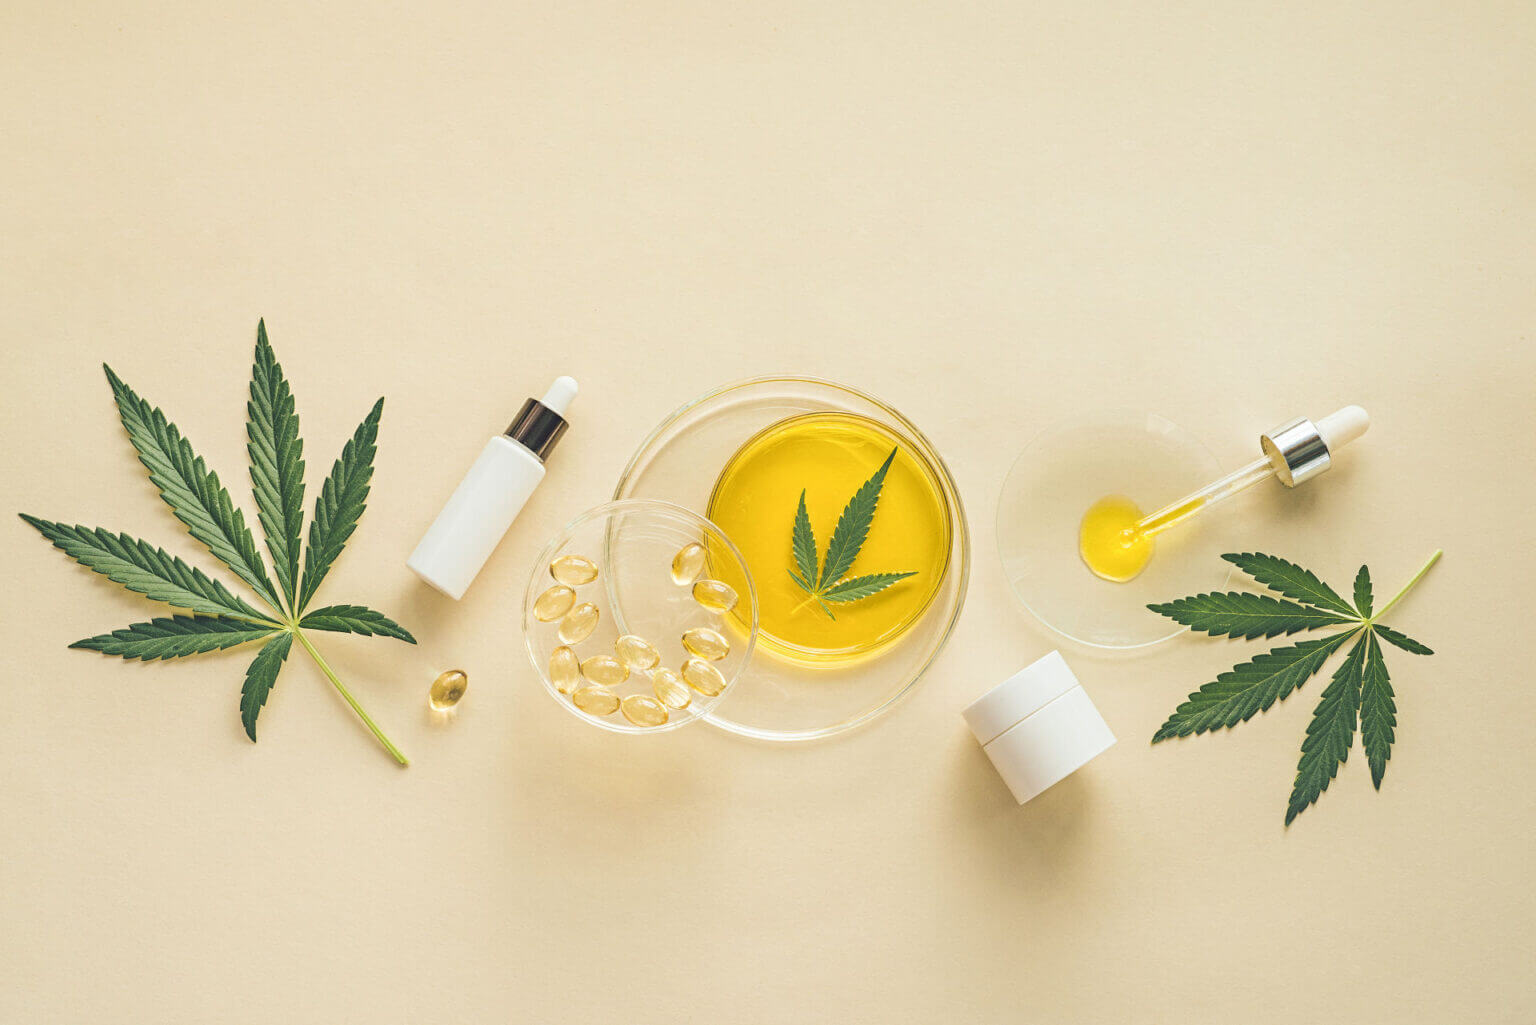 green_skin-care-cosmetics-with-cbd-oil-and-cannabis-in-a-2022-07-25-23-53-50-utc